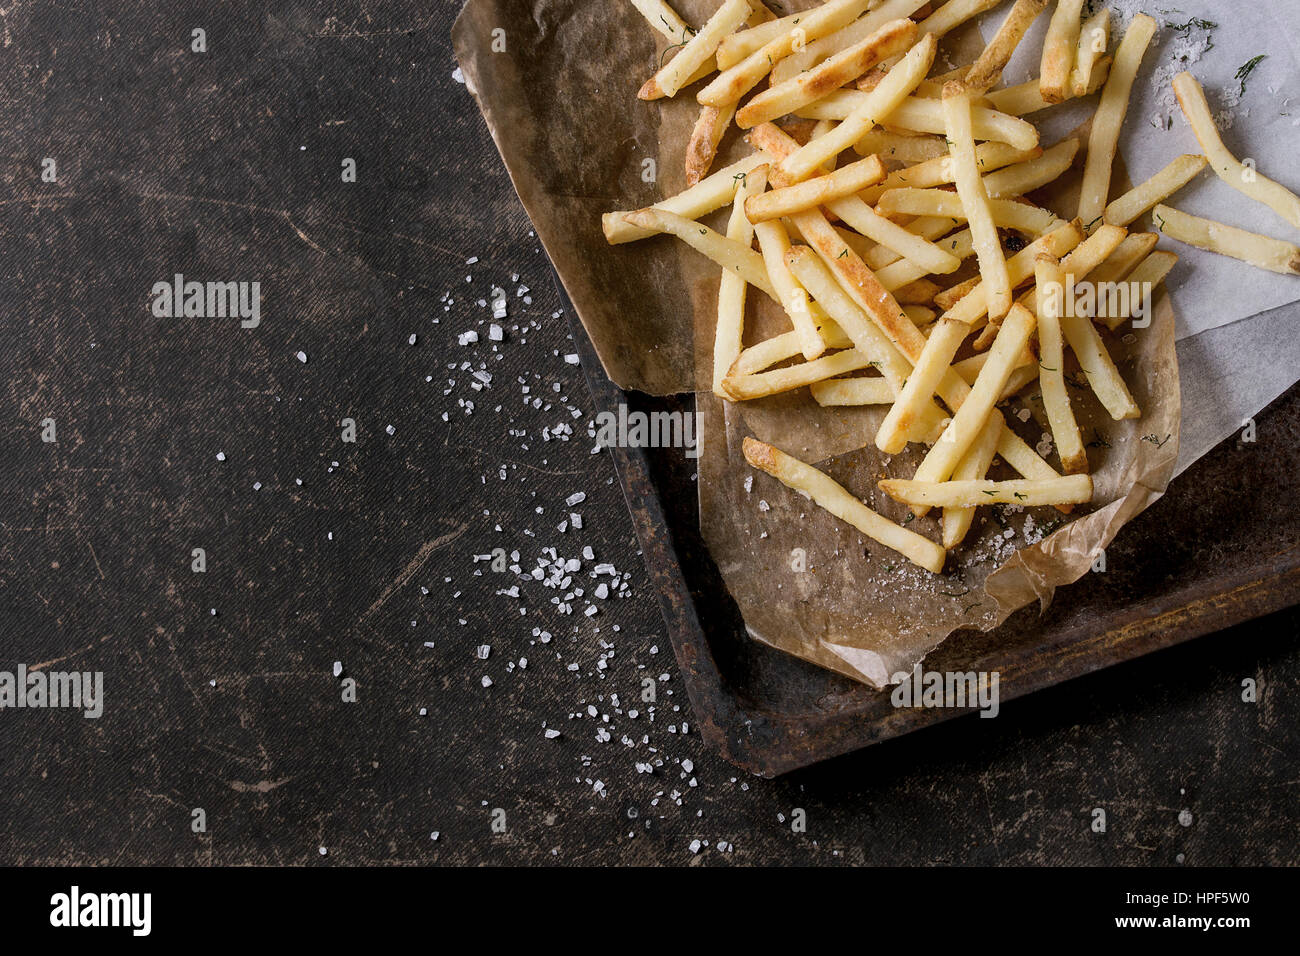 Fast food french fries potatoes with skin served with salt and herbs on baking paper on old rusty oven tray over dark texture background. Top view, sp Stock Photo